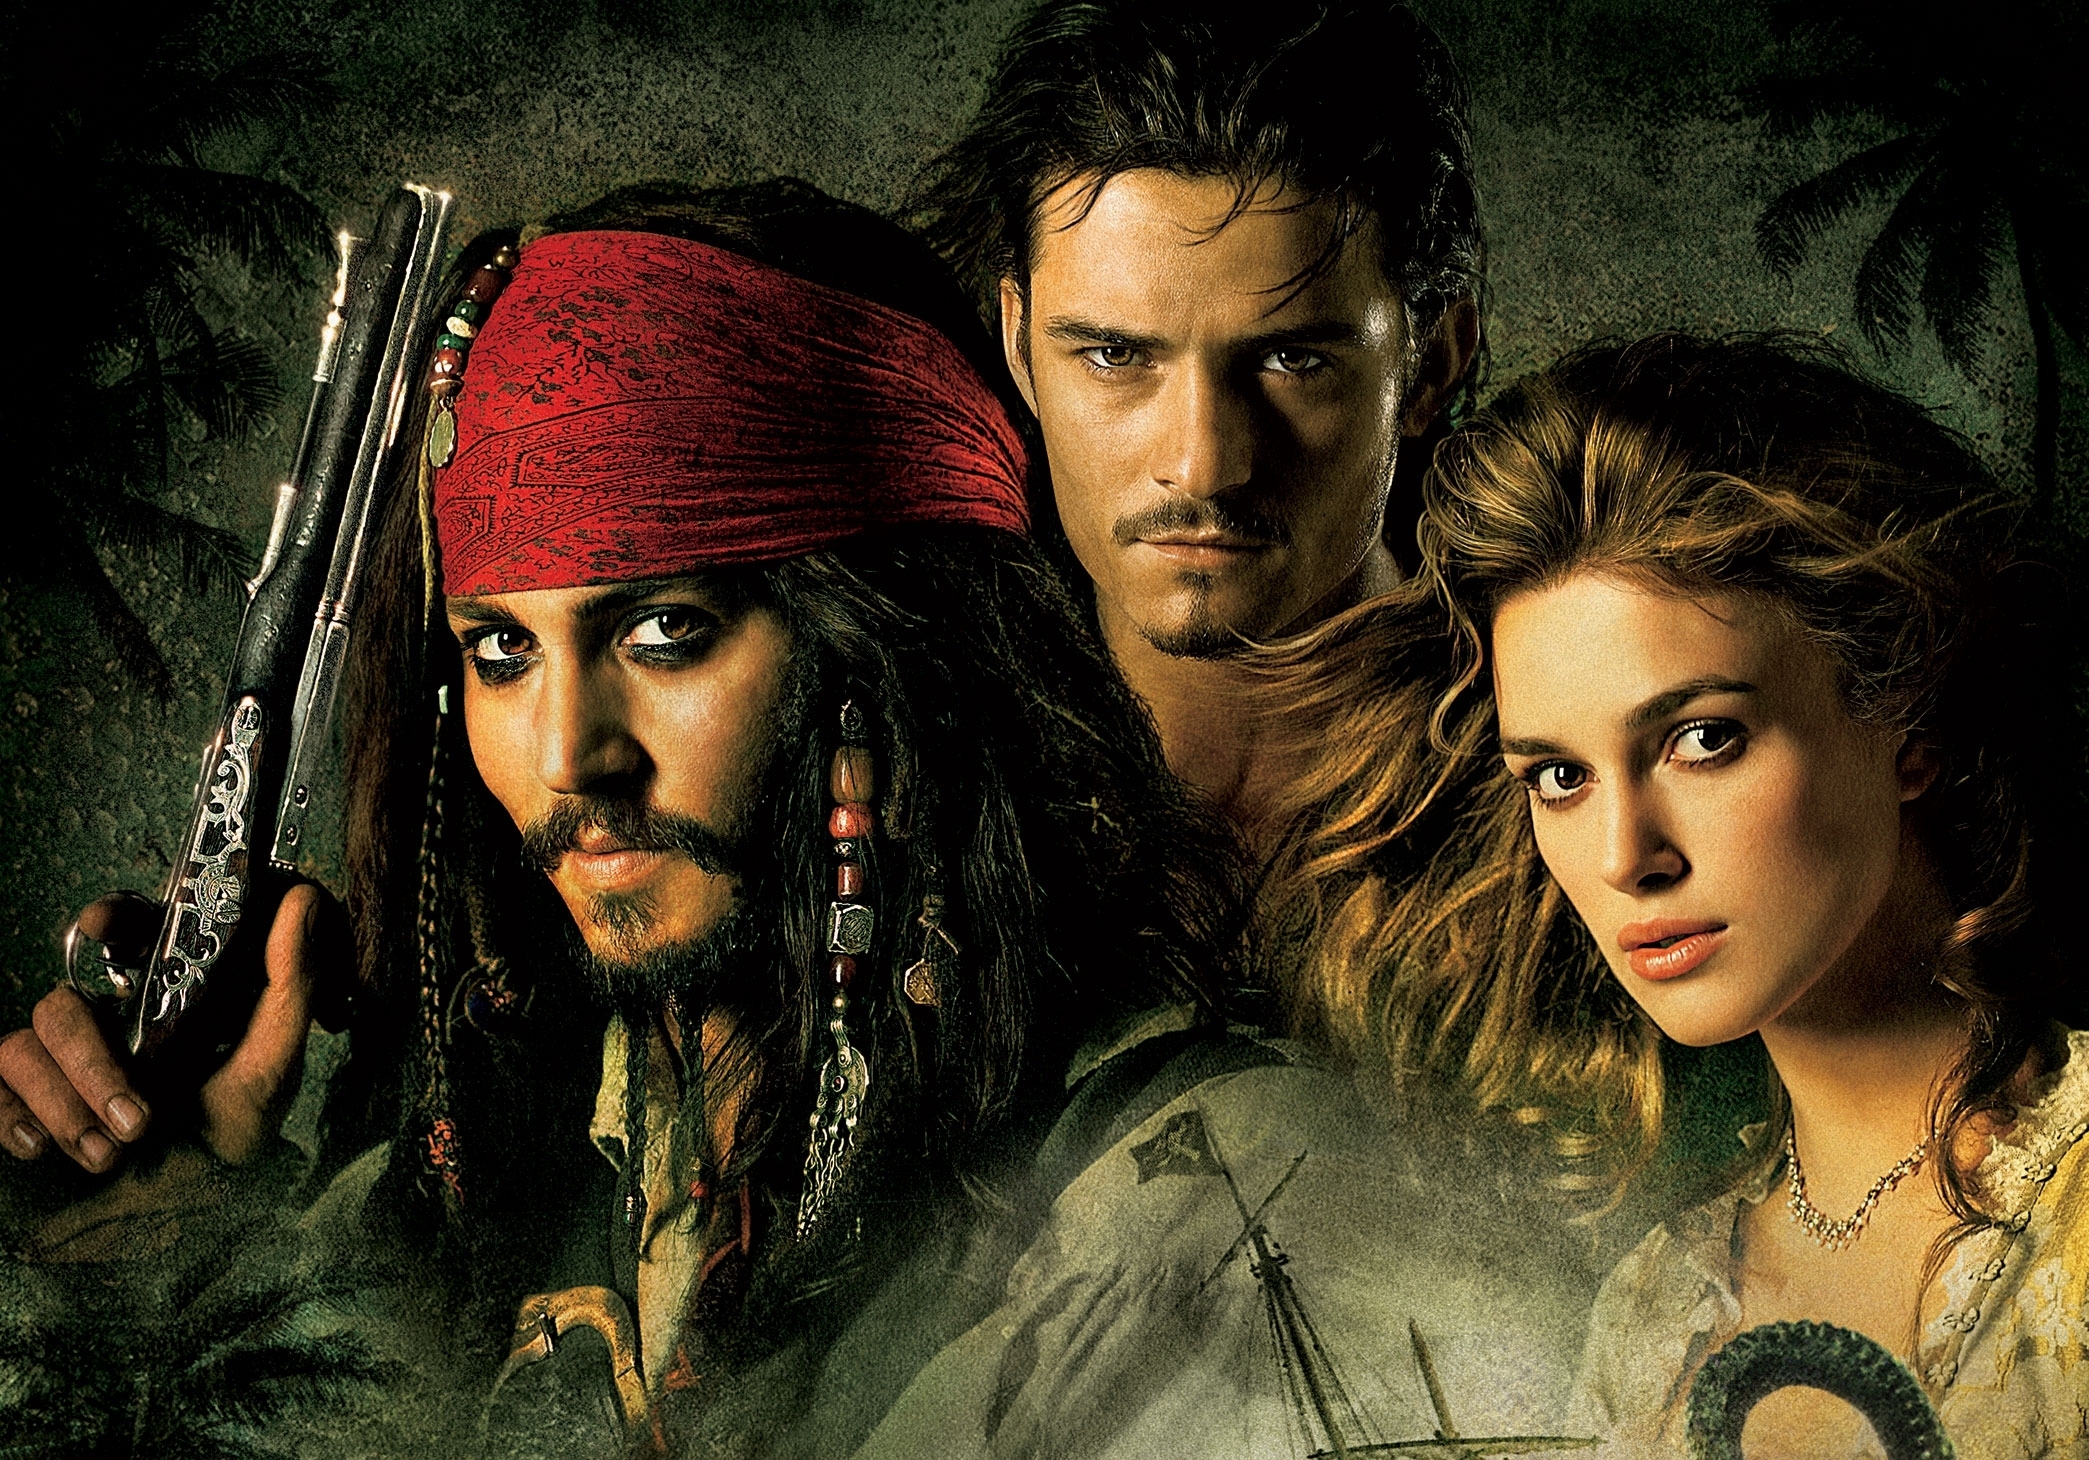 Pirates of the Caribbean Theme Song | Movie Theme Songs & TV Soundtracks - What Is Pirates Of The Caribbean Streaming On